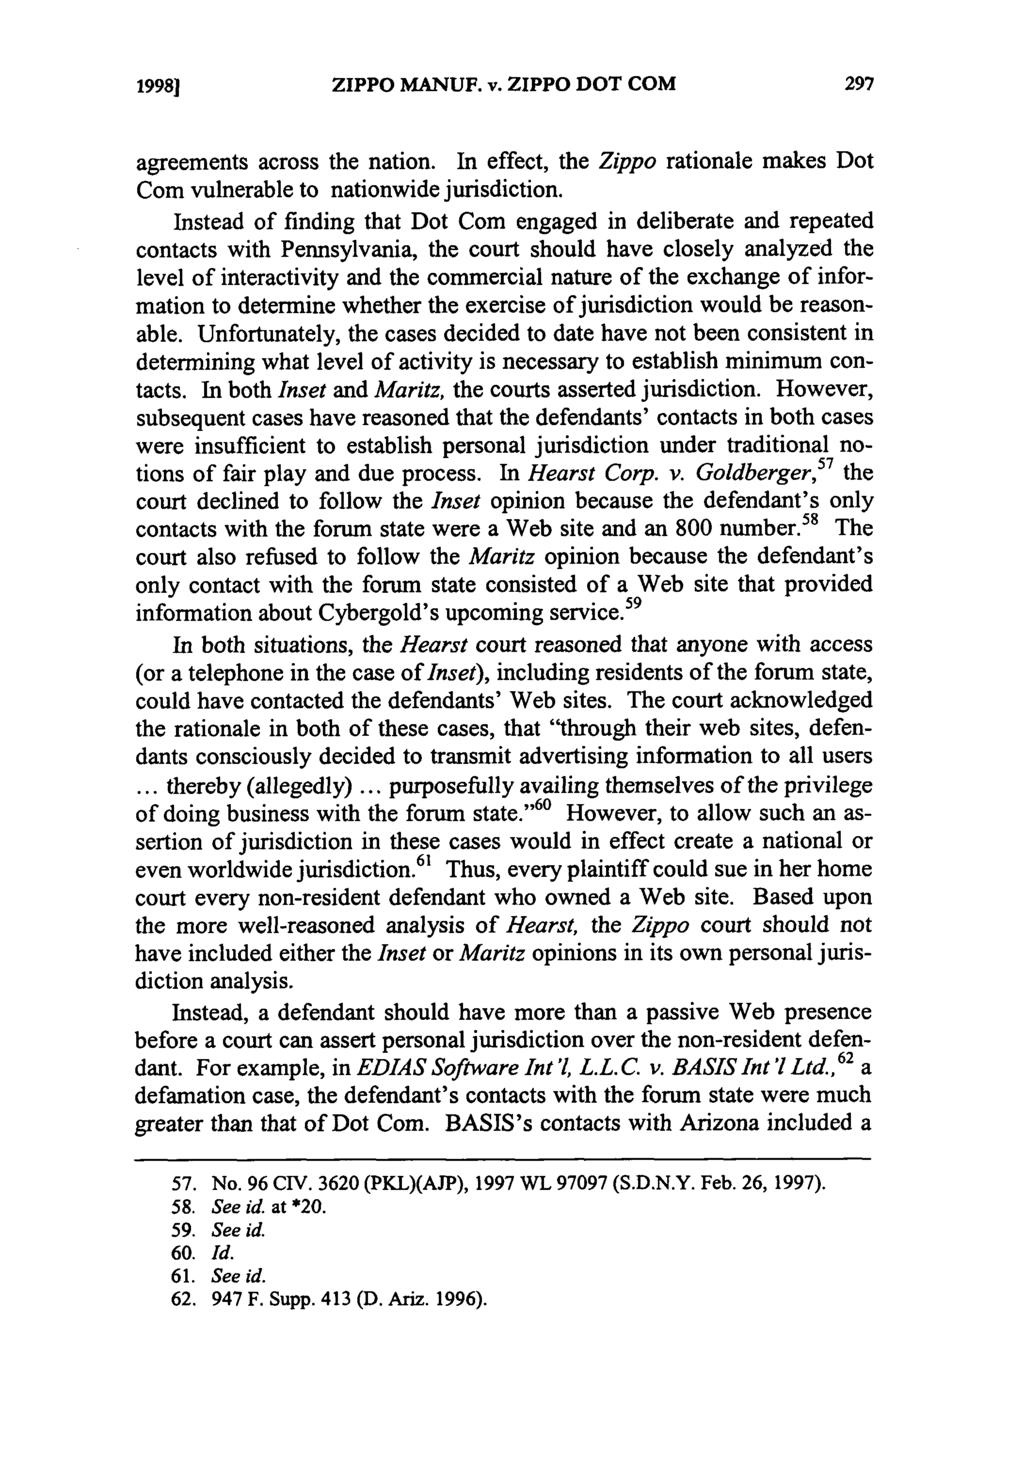 19981 ZIPPO MANUF. v. ZIPPO DOT COM agreements across the nation. In effect, the Zippo rationale makes Dot Com vulnerable to nationwide jurisdiction.